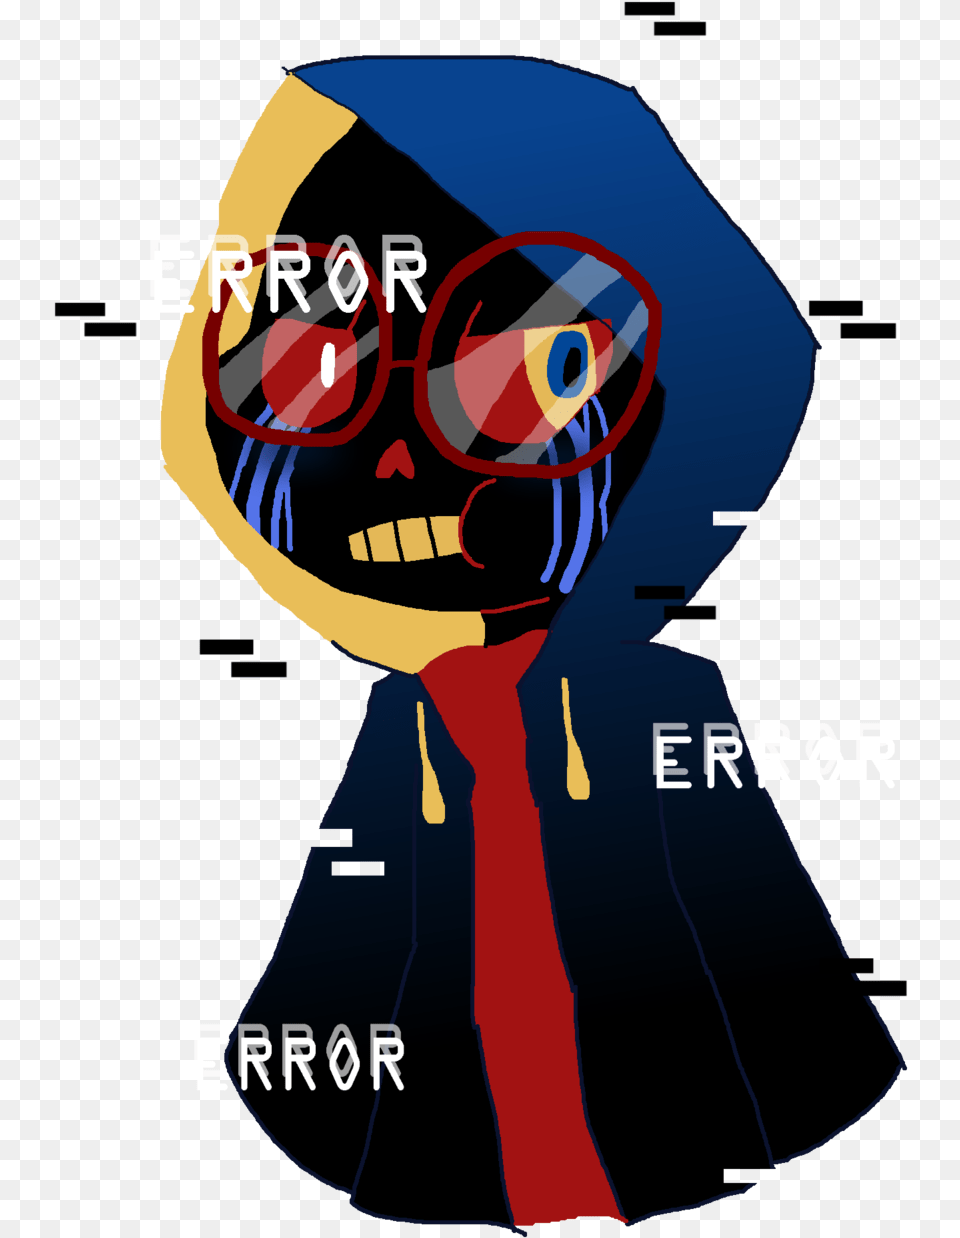 Error Sans With Glasses, Cape, Clothing, Person, Accessories Png Image